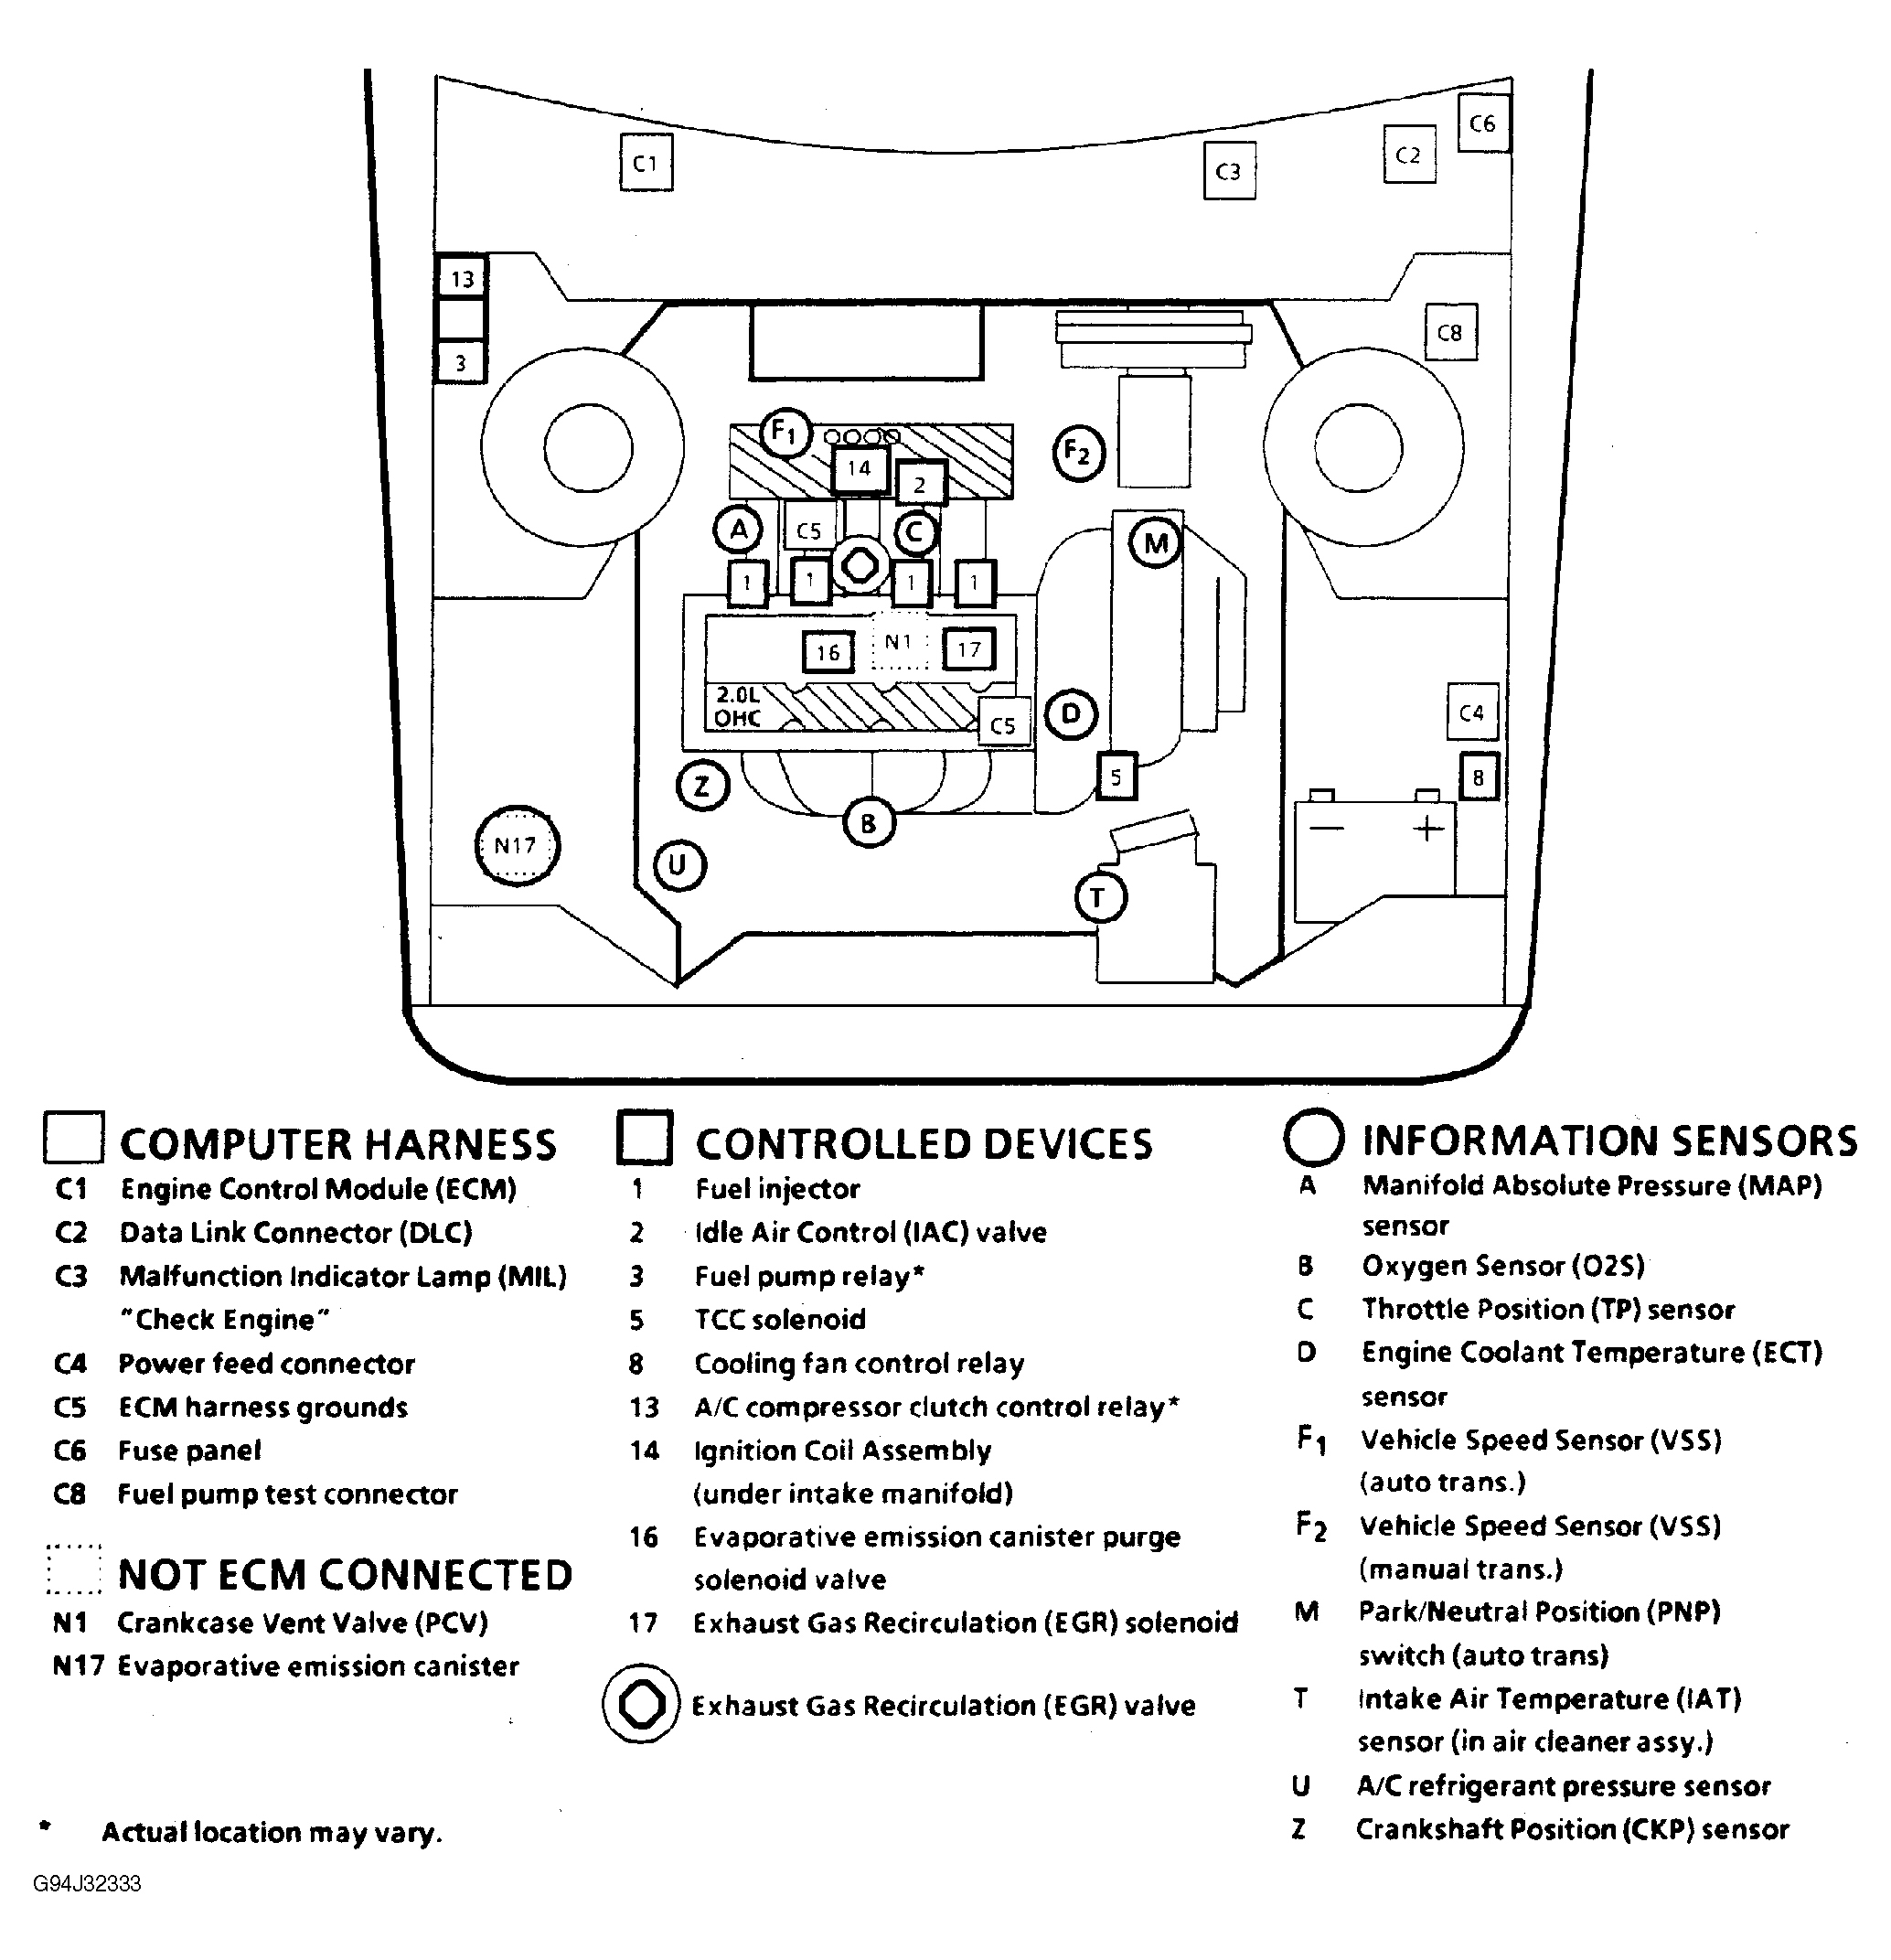 Chevrolet Cavalier VL 1994 - Component Locations -  Component Locations (1 Of 3)